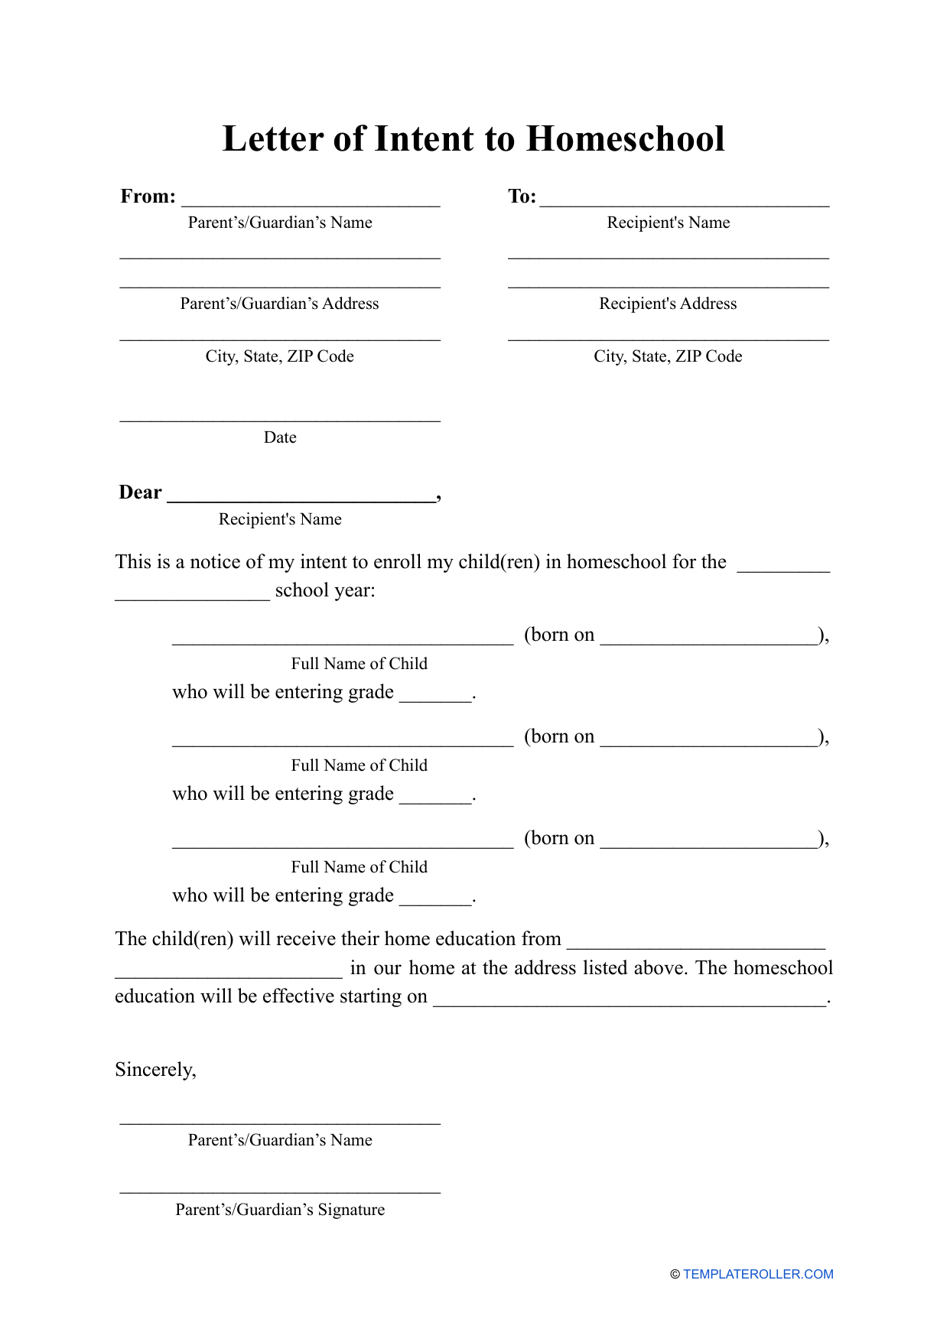 letter-of-intent-to-homeschool-template-download-printable-pdf-templateroller